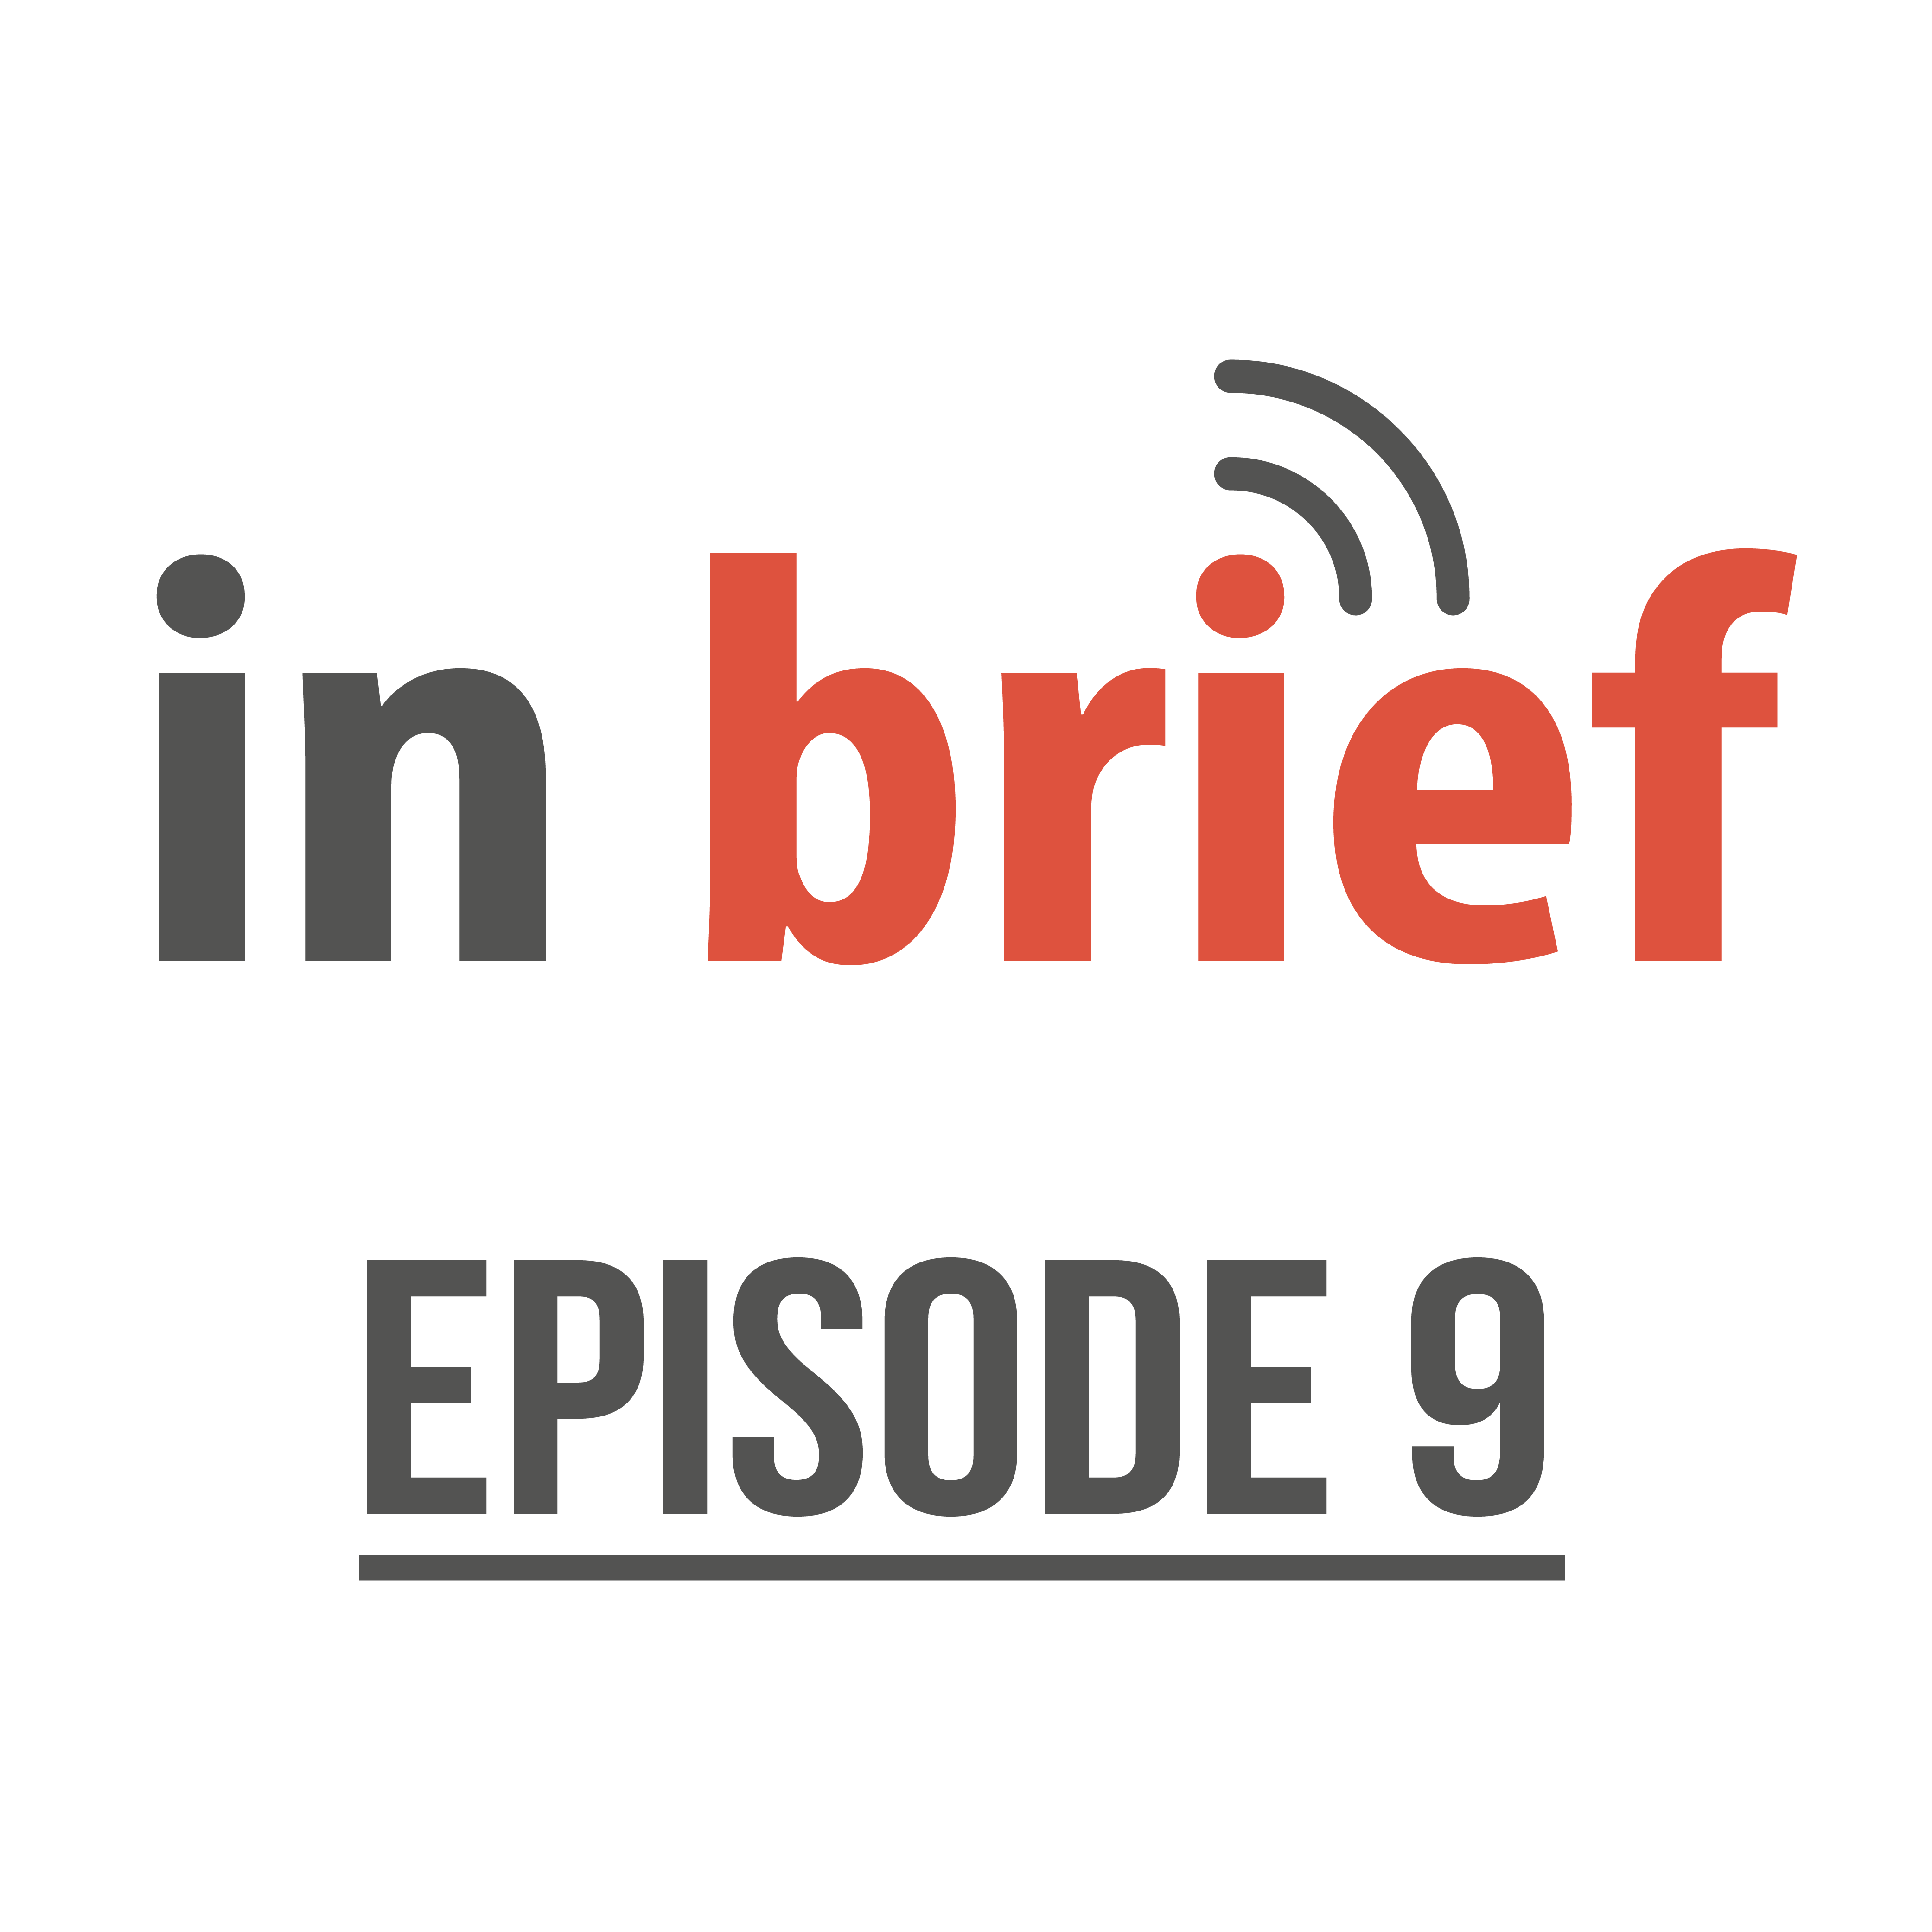 Episode 9: The LLLT, Pioneering Efforts in Access to Justice